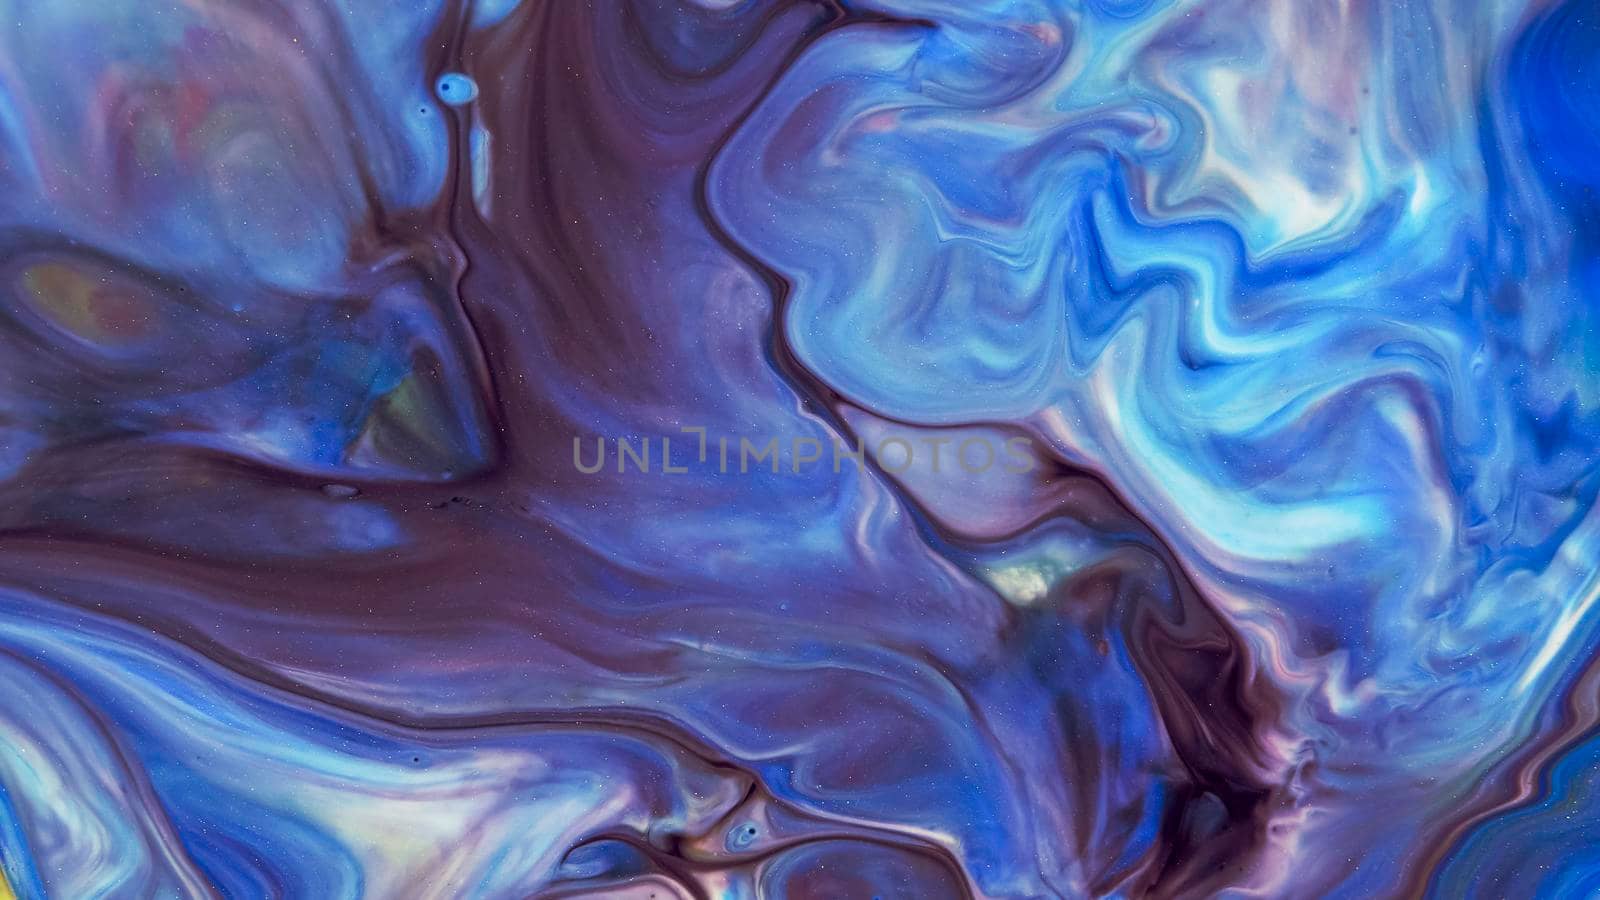 Blue streaks on a white background. Liquid abstractions. Abstract natural art. Abstract painting. Marble effect painting. Mixed azure and white oil paints. Unusual handmade background for poster, card, invitation.